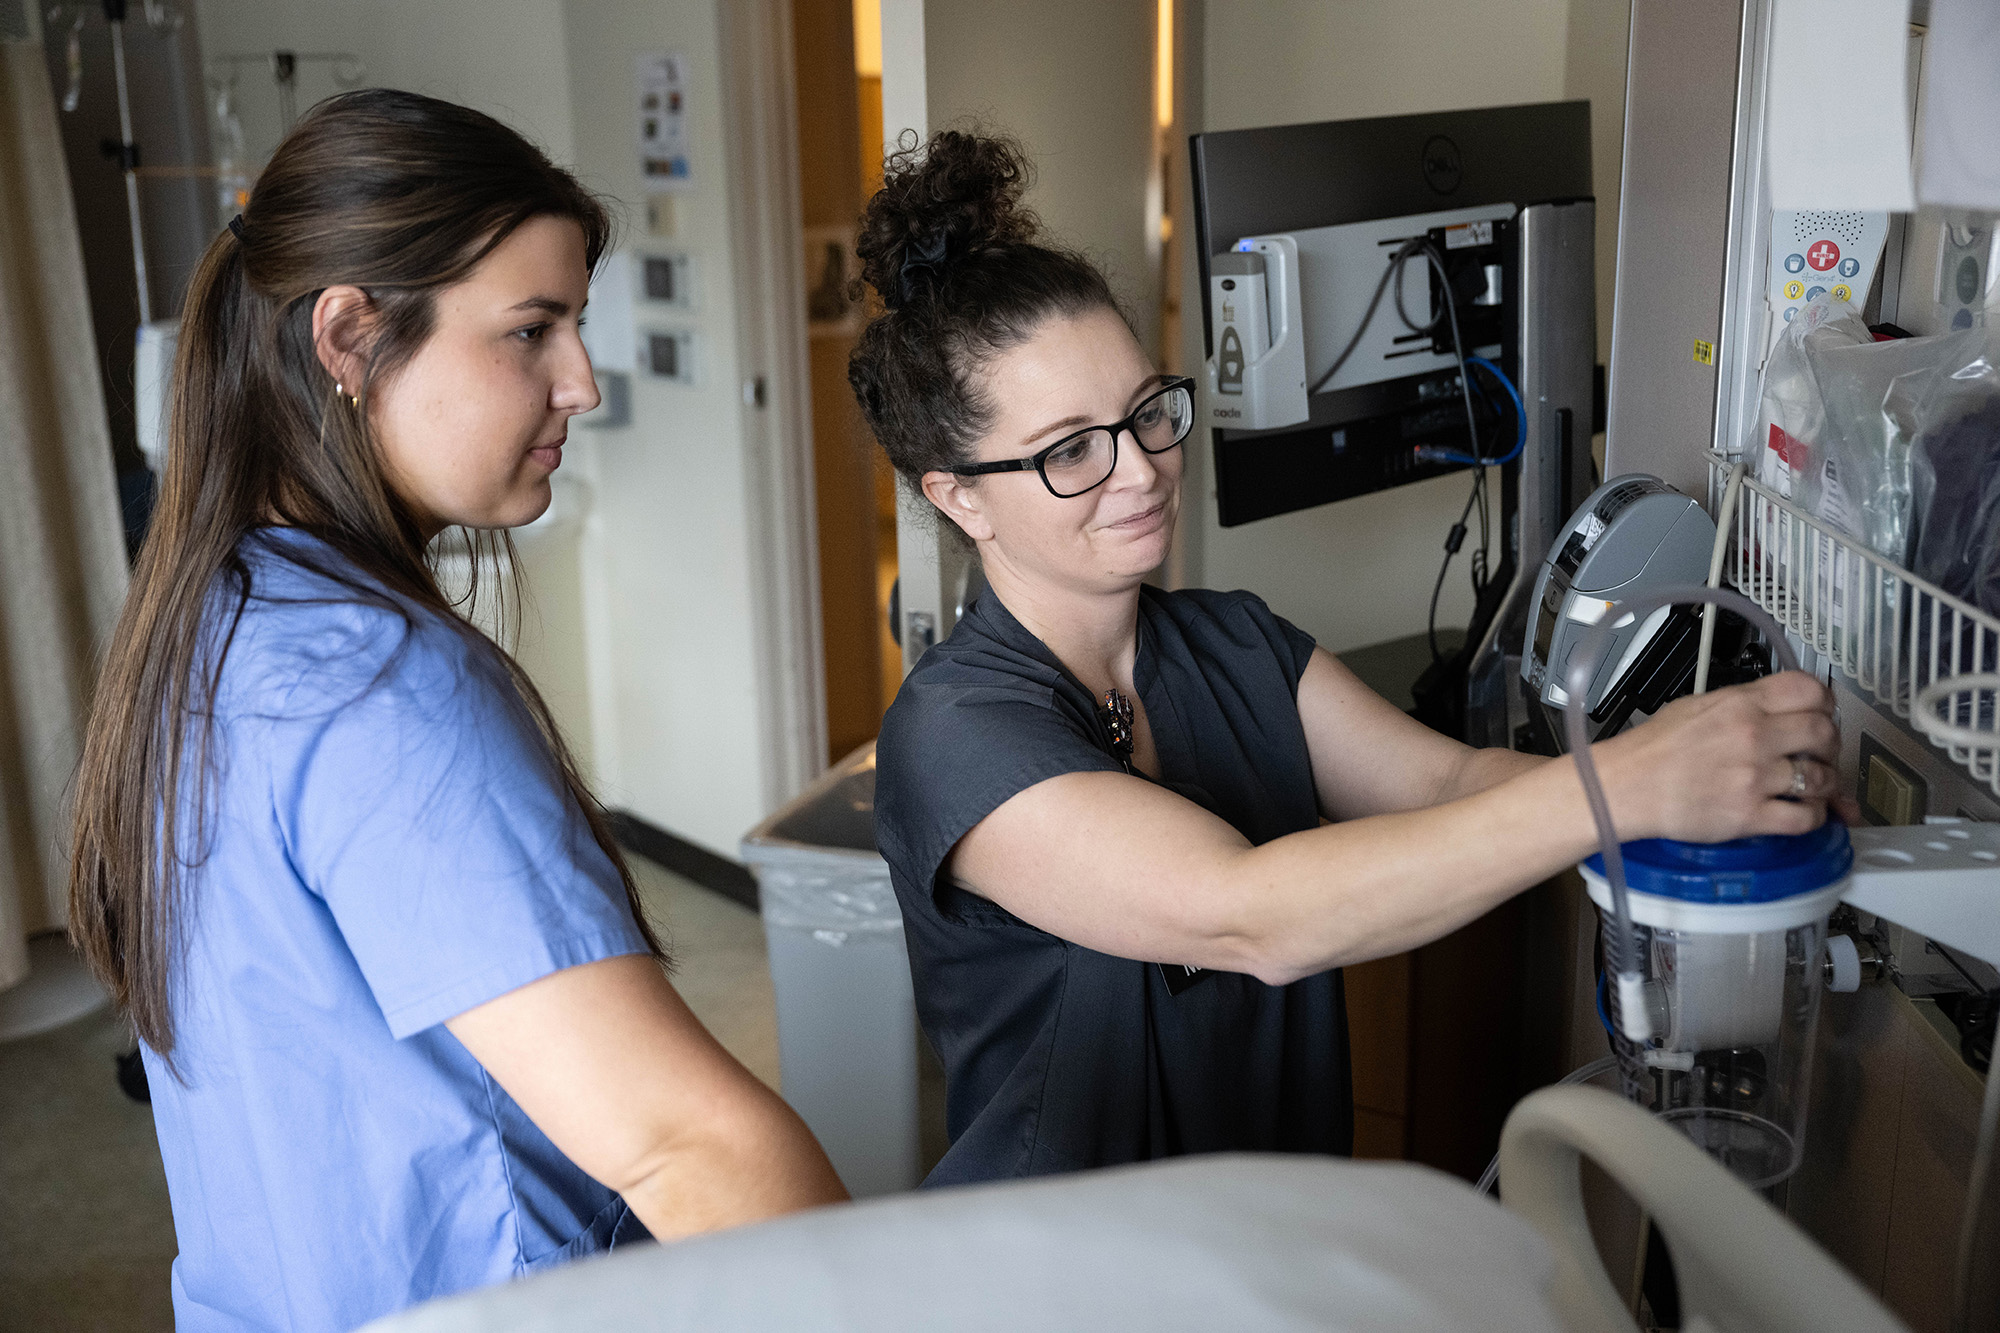 University of Iowa student Alana Gratton and nurse manager Jessica McDaniel working in a hospital